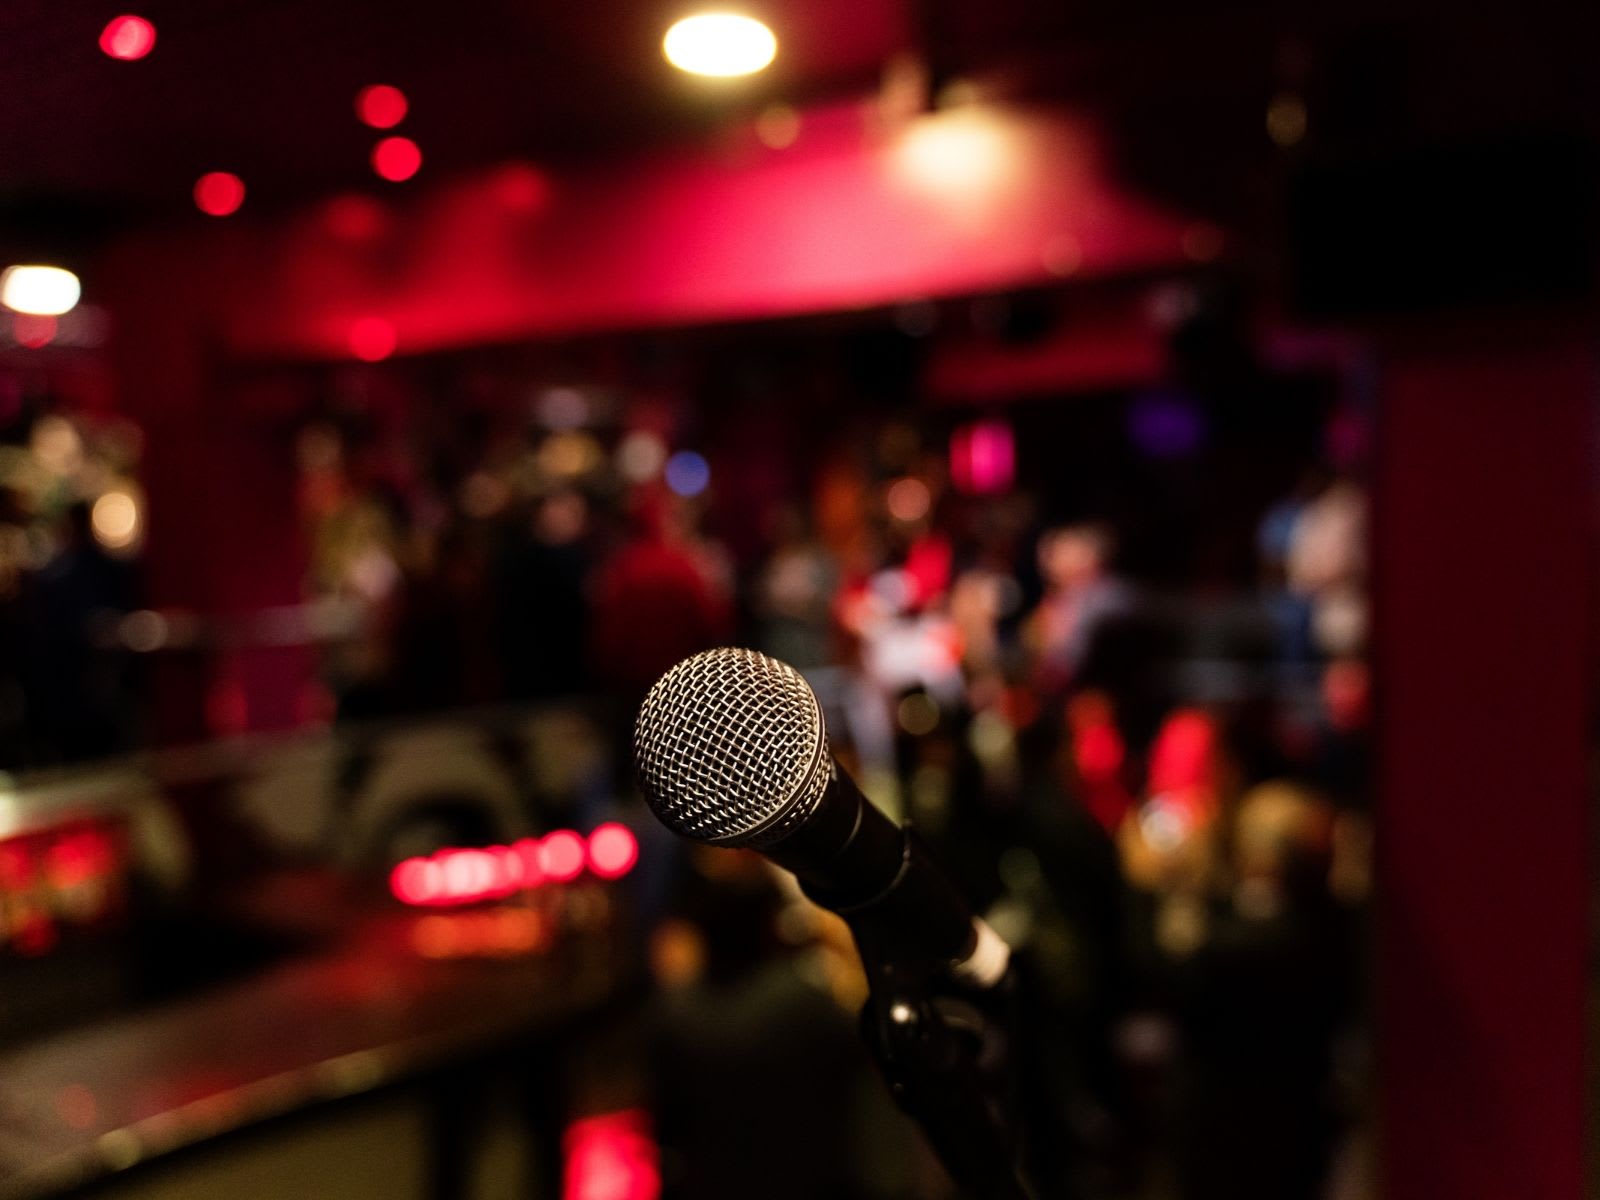 Microphone on a stand-up comedy stage